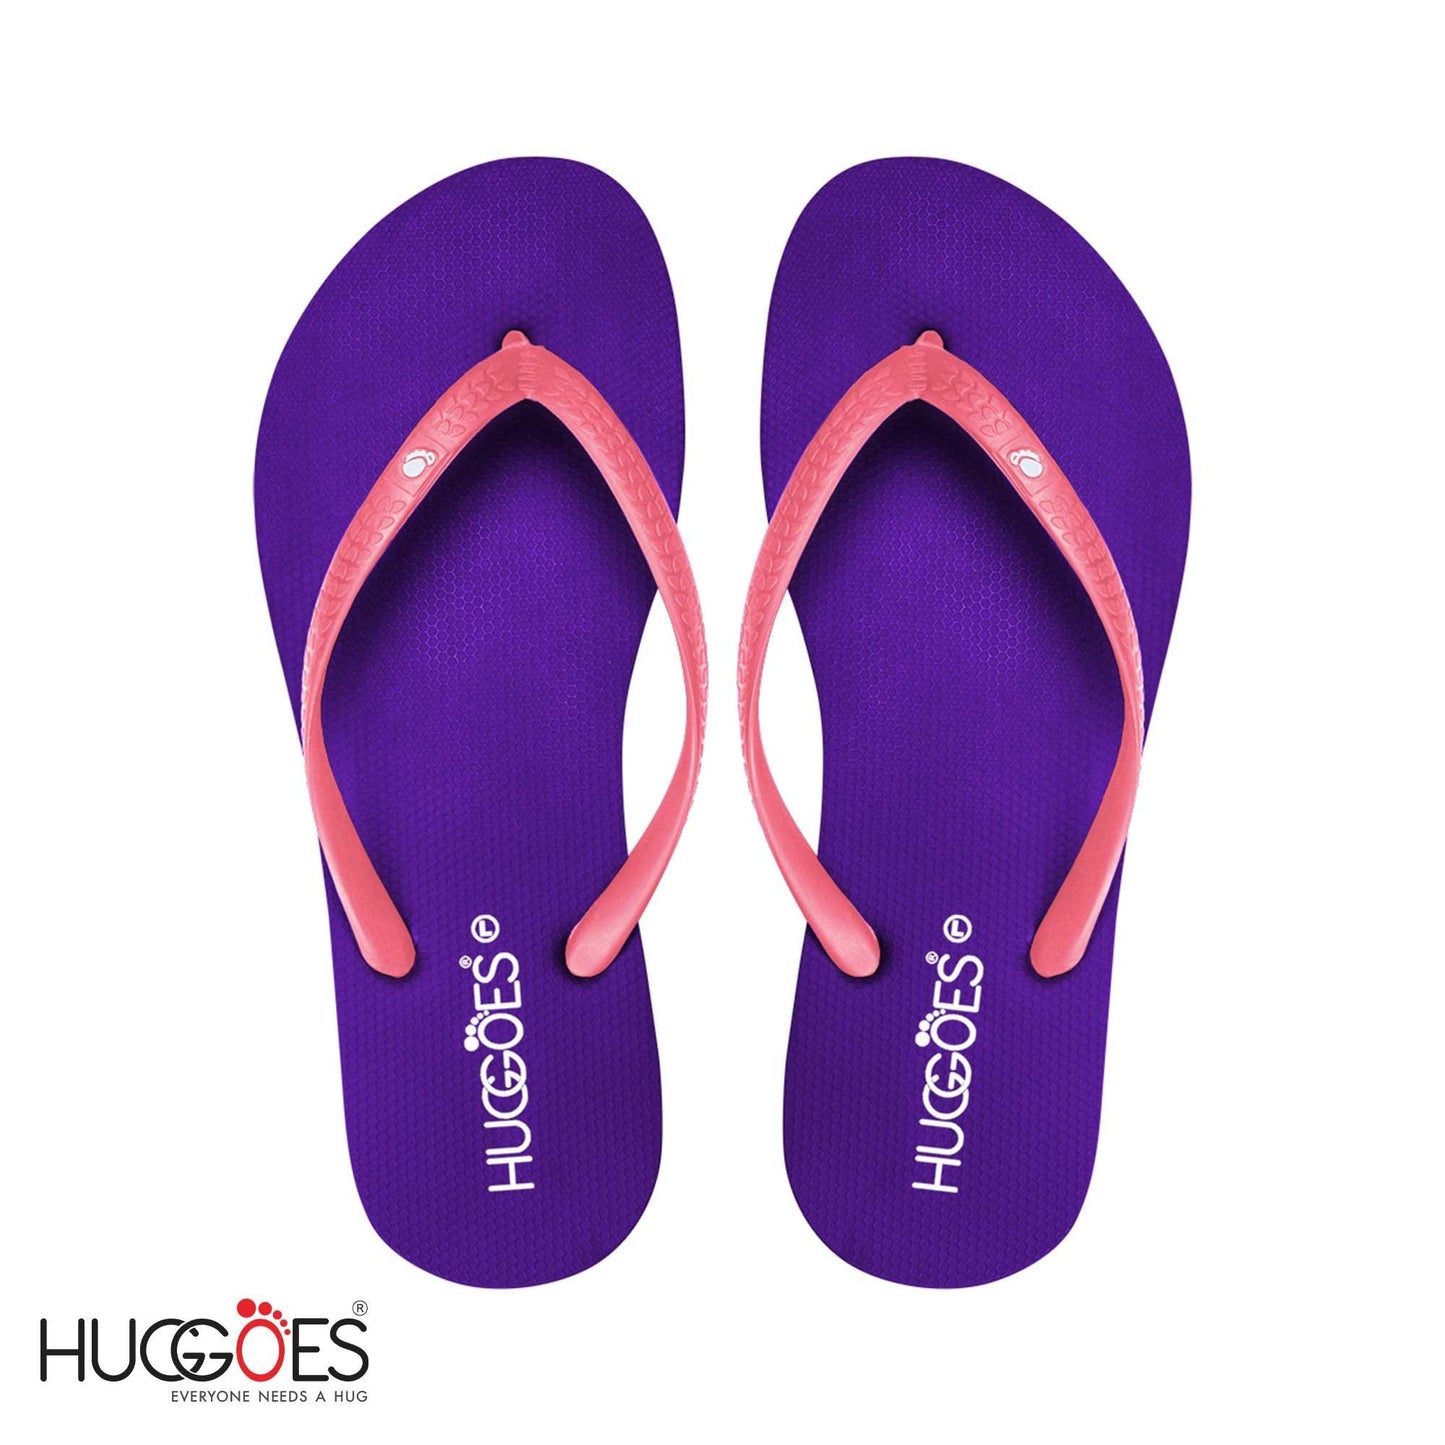 Huggoes by Aerothotic - Lilac Women's Flip Flops Slippers - Original Thailand Imported - VL1/SP1